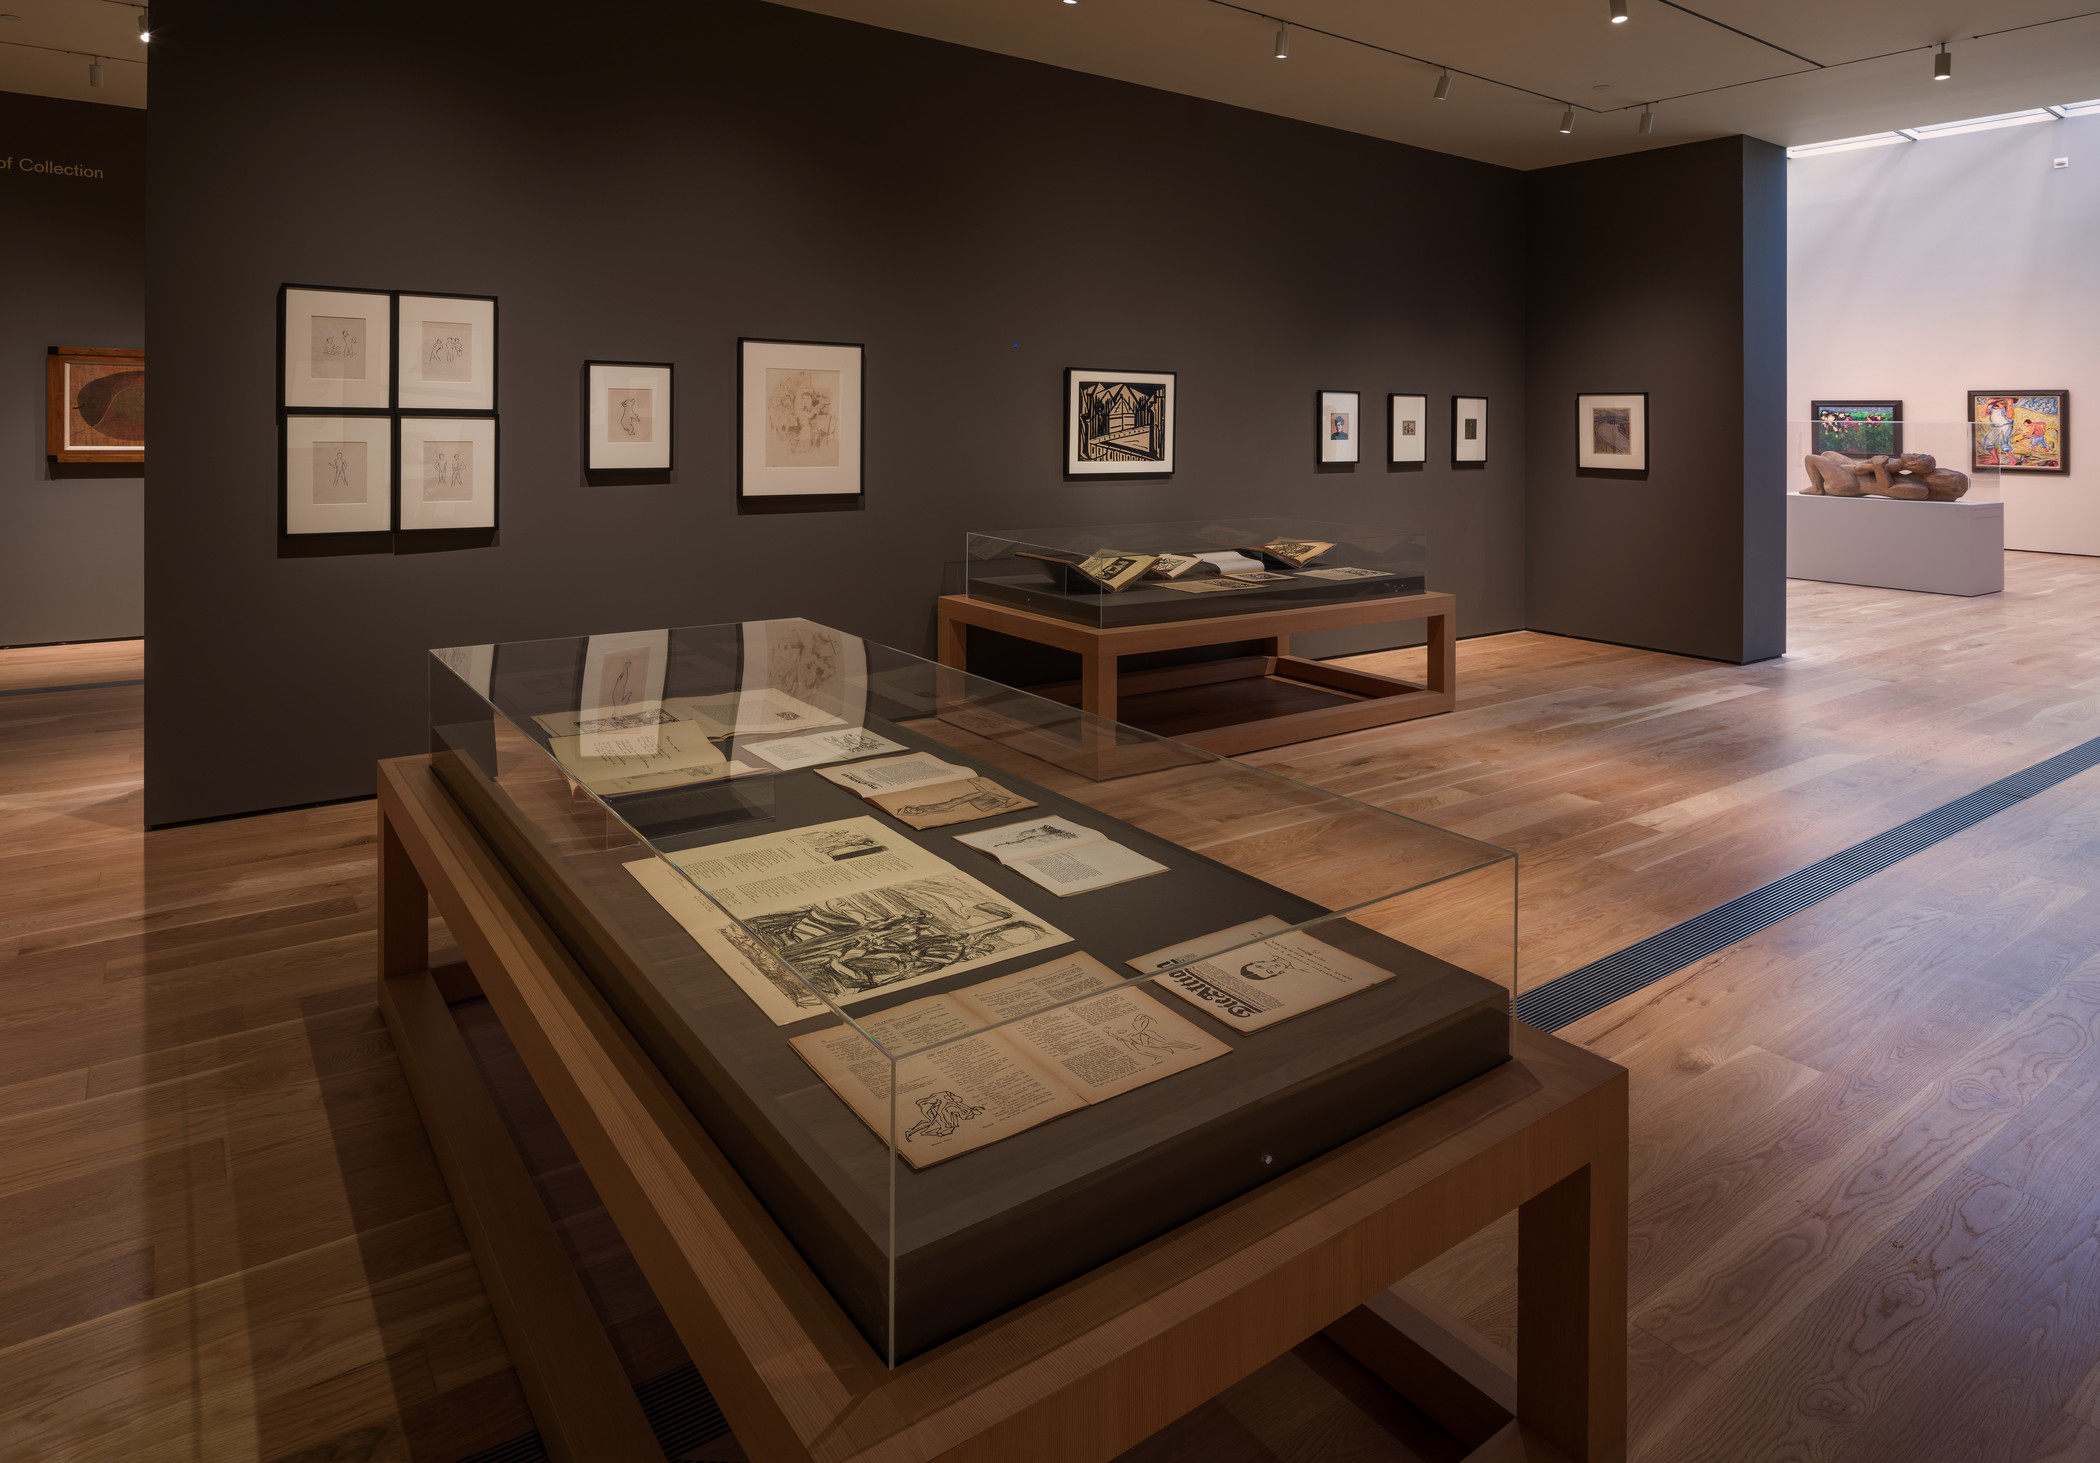 Gallery with prints and vitrines